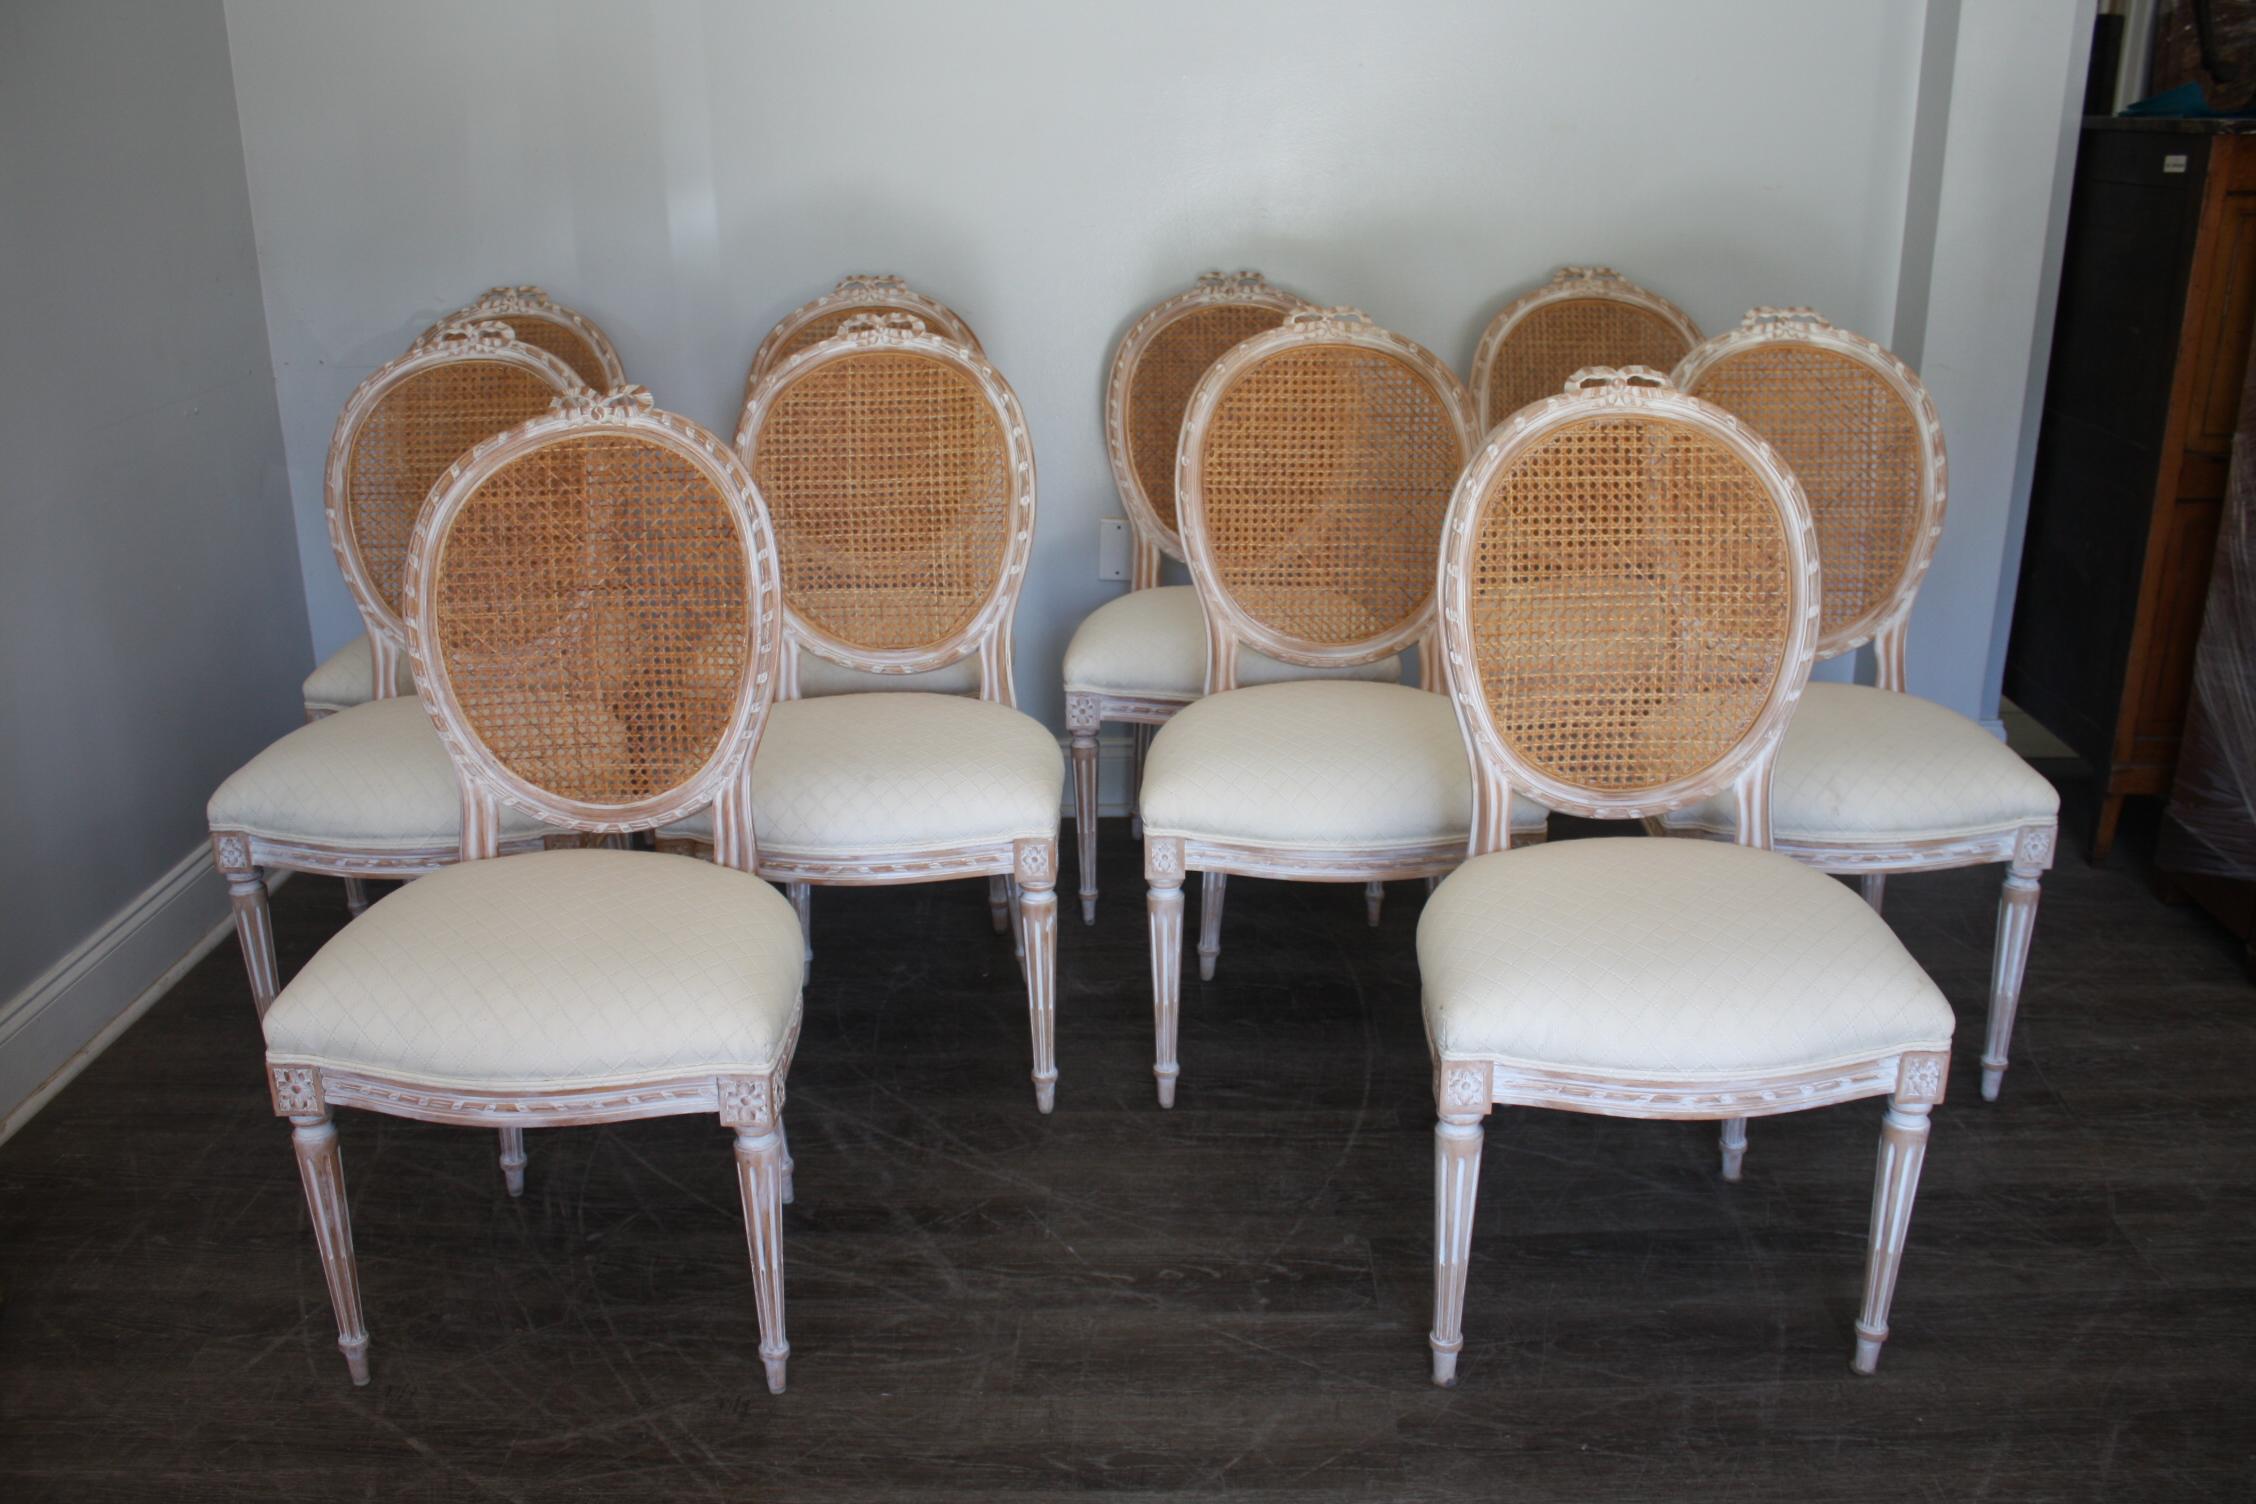 Set of 10 Dining Room Chairs, the back is caned and in good condition as well as the fabric on the seat.